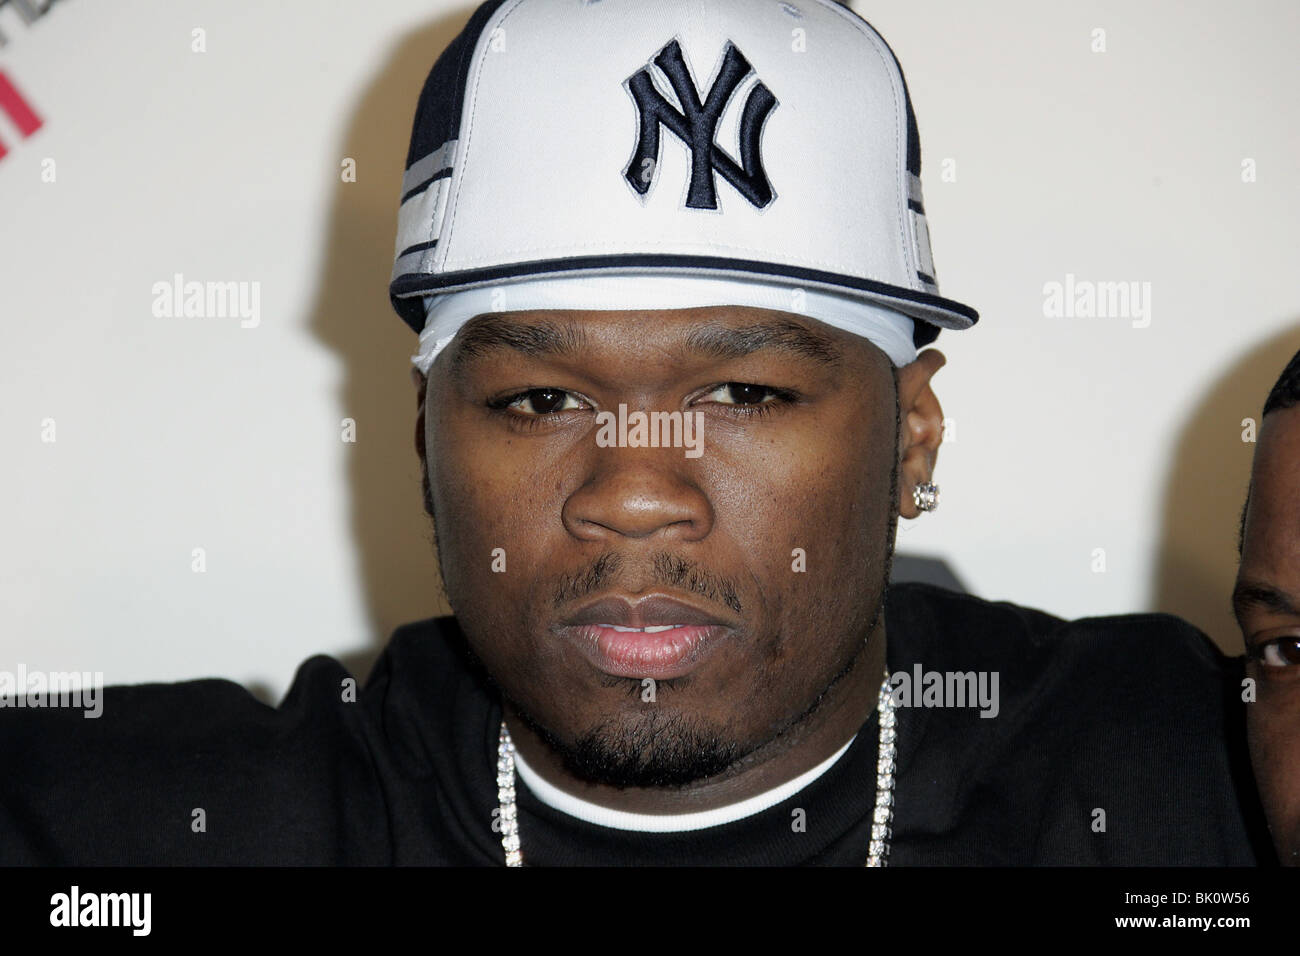 50 CENT SPIKE TV VIDEO GAME AWARDS 2005 GIBSON AMPHITHEATRE LOS ANGELES USA 18 November 2005 Stock Photo